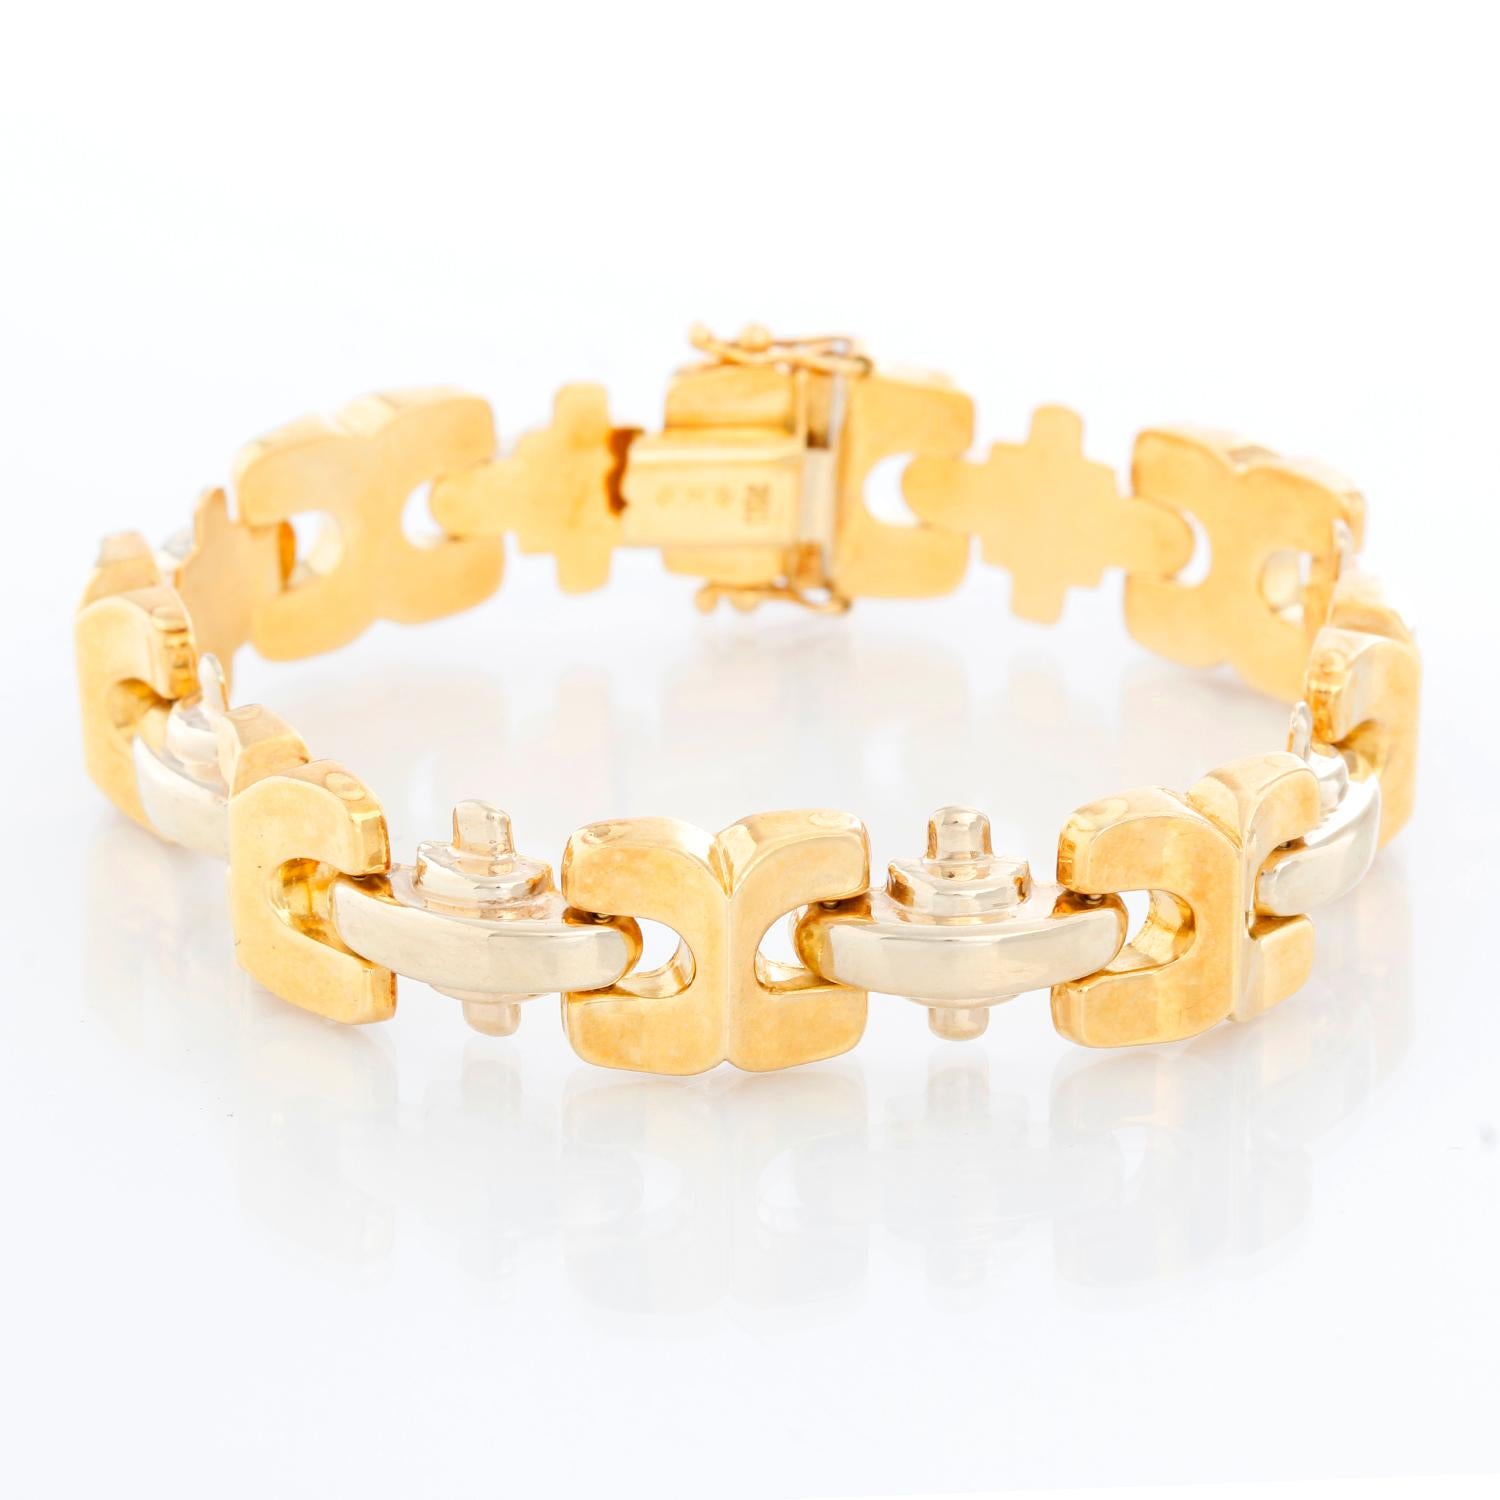 Quadri 18K Yellow Gold Link Bracelet - Beautiful link bracelet. Stamped 750, Quadri . Measures 11 mm wide x 7 inches long. Total weight 27.3 grams. Pre-owned with custom box.